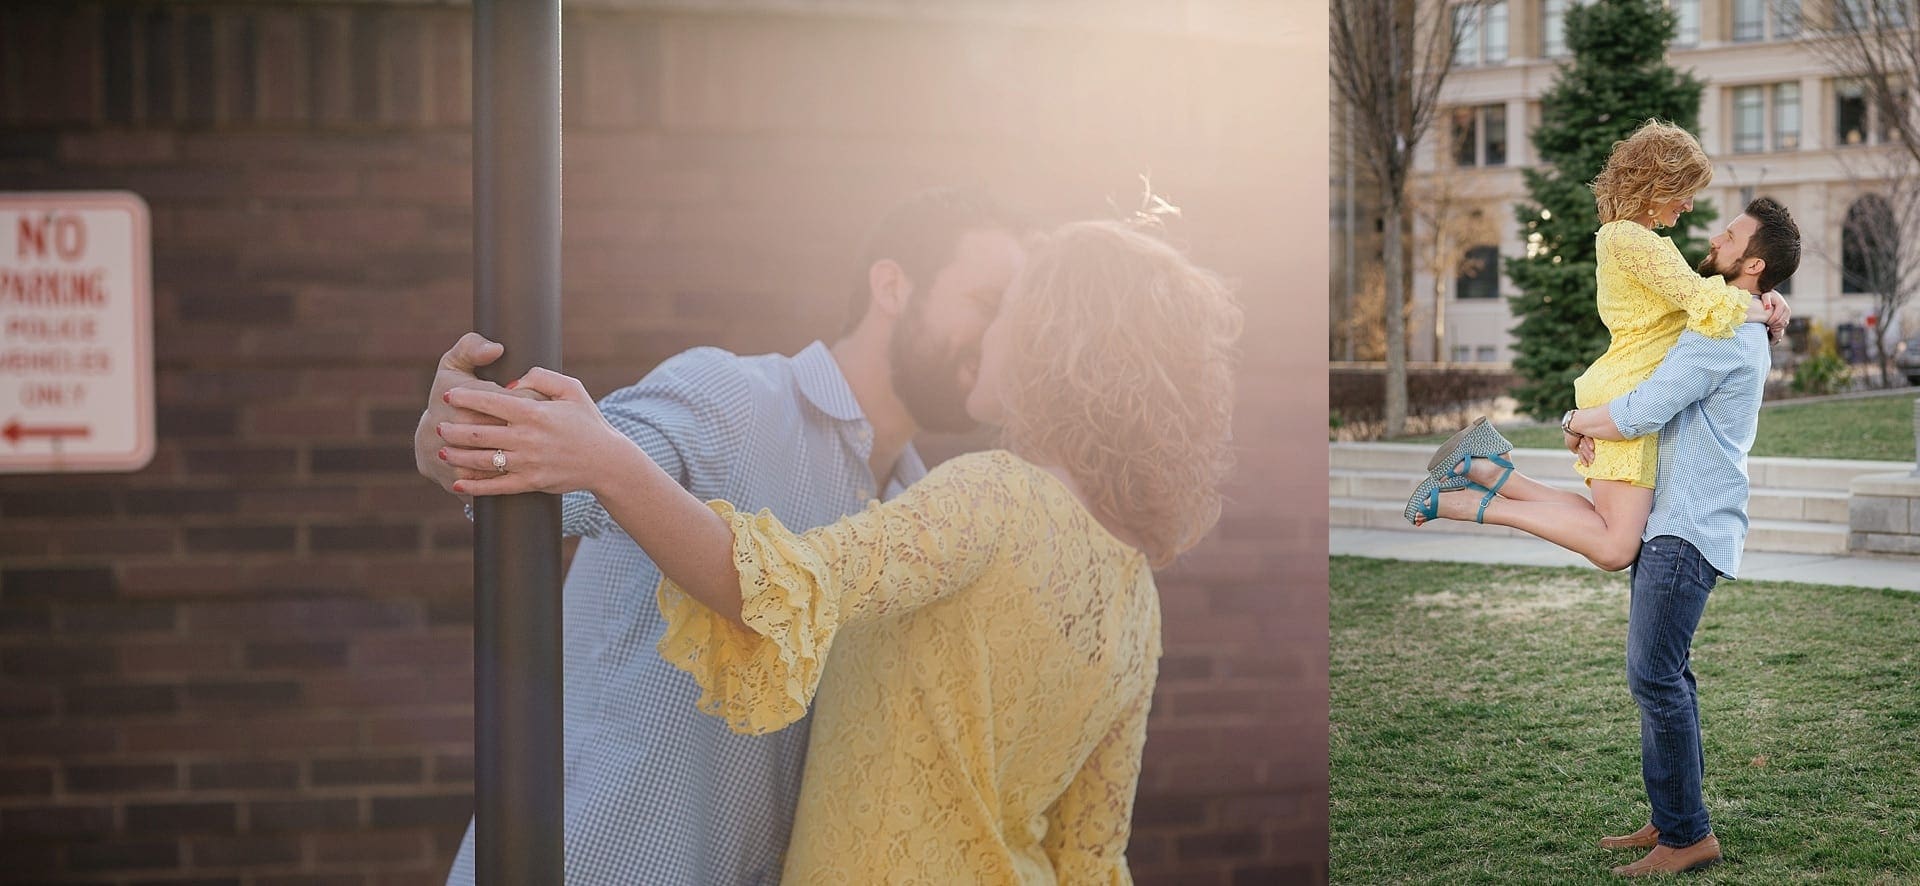 Couple embraces during engagment photo session in downtown Asheville, NC